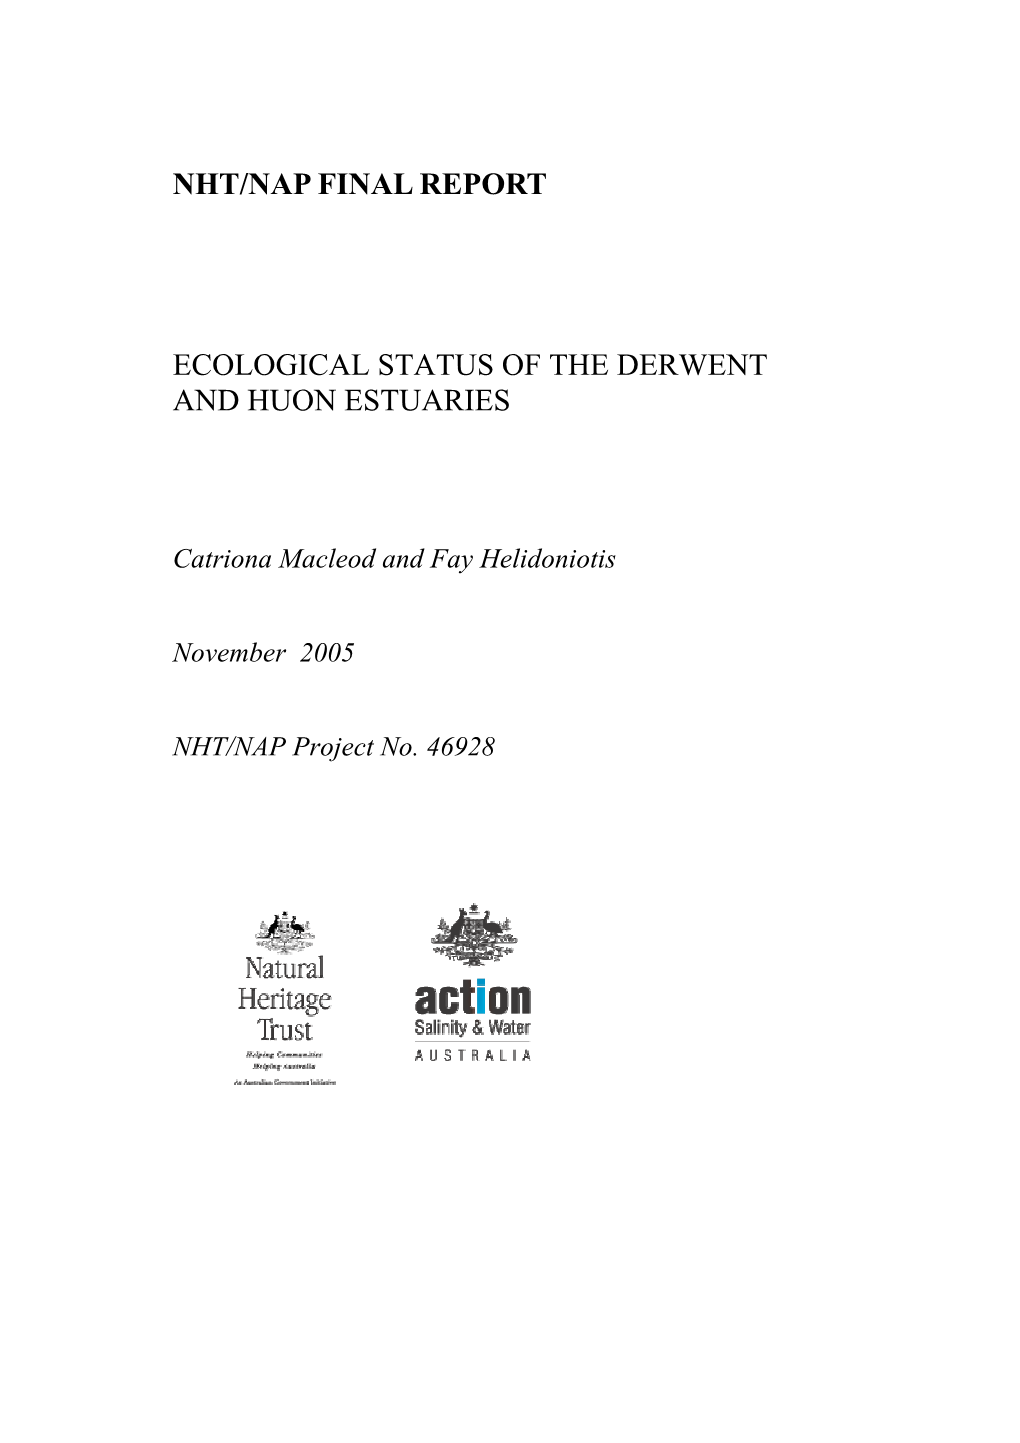 Ecological Status of the Derwent and Huon Estuaries